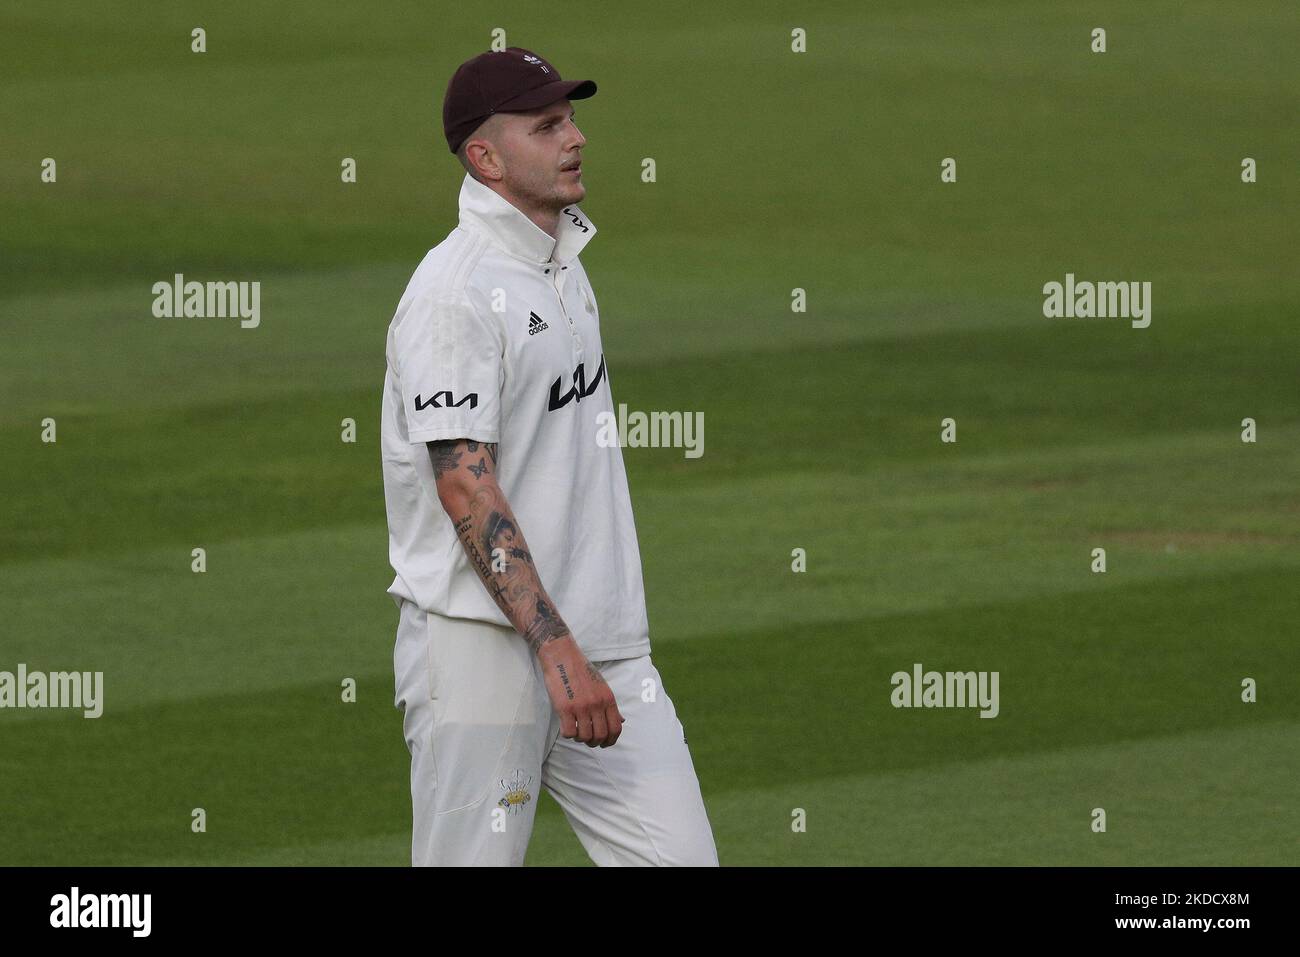 Conor McKerr of Surrey during the LV= County Championship Division 1 match between Surrey and Kent at the Kia, Oval, London on Tuesday 28th June 2022. (Photo by Robert Smith/MI News/NurPhoto) Stock Photo